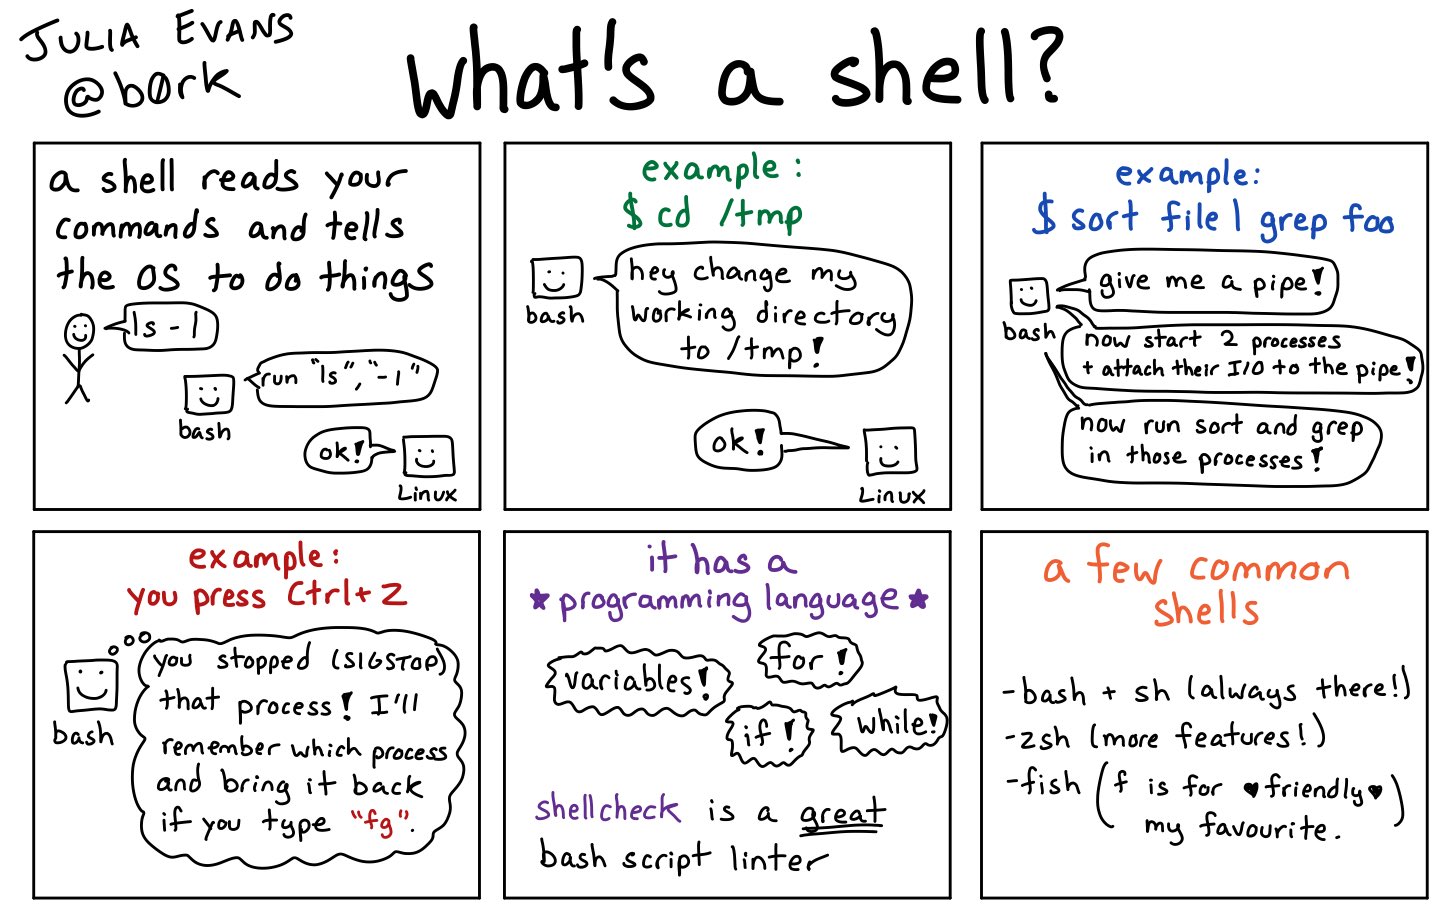 What is Shell